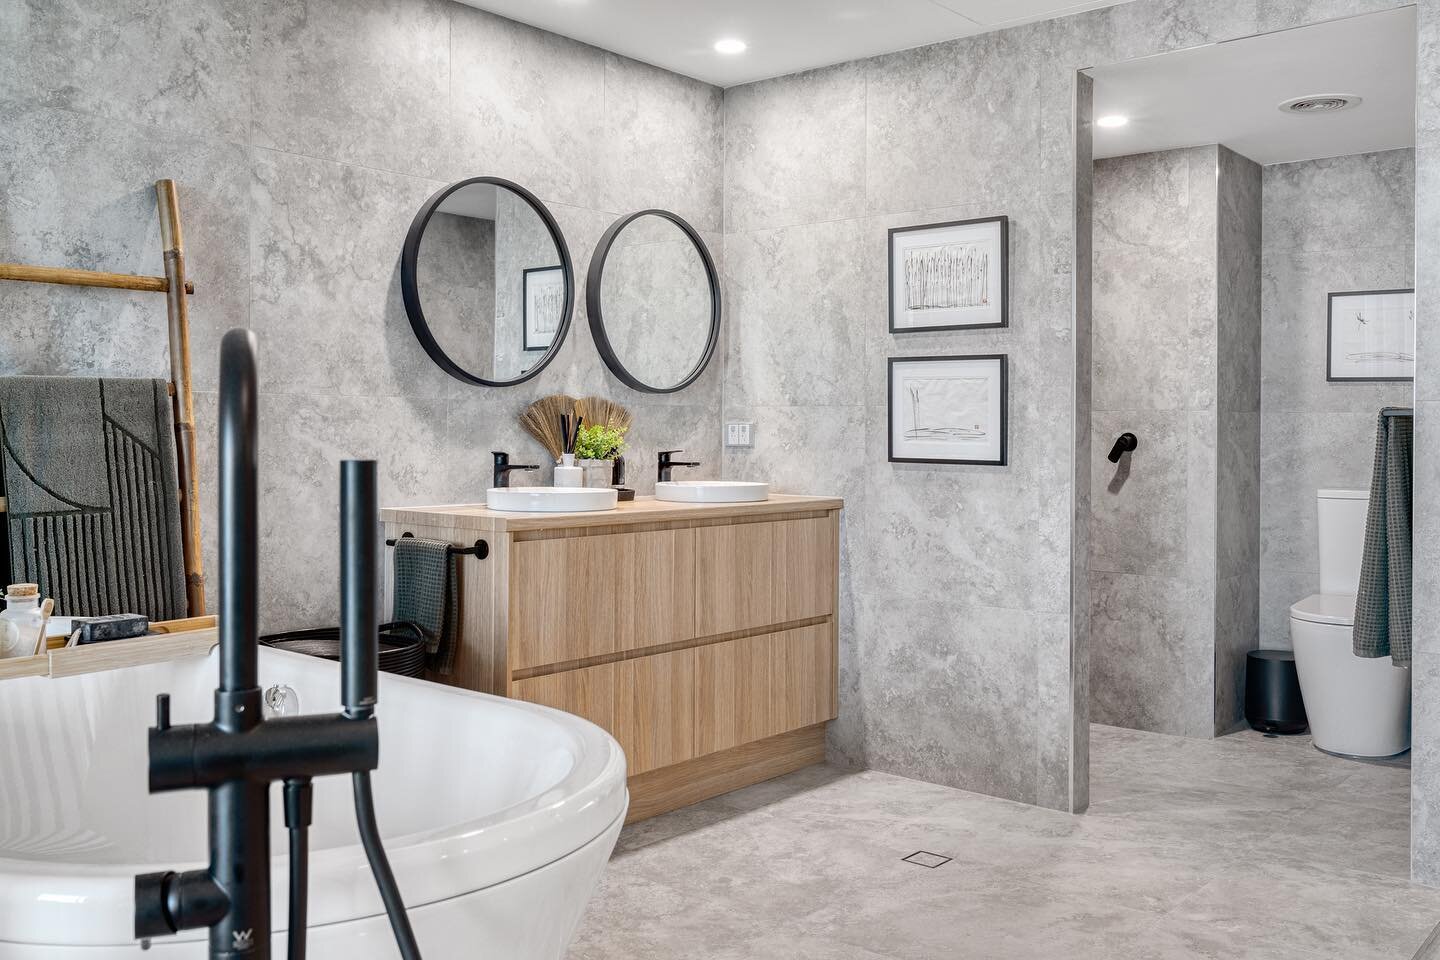 A Luxurious Ensuite Renovation&hellip;
Swipe right to see more.

Designed and constructed by @haslhaus